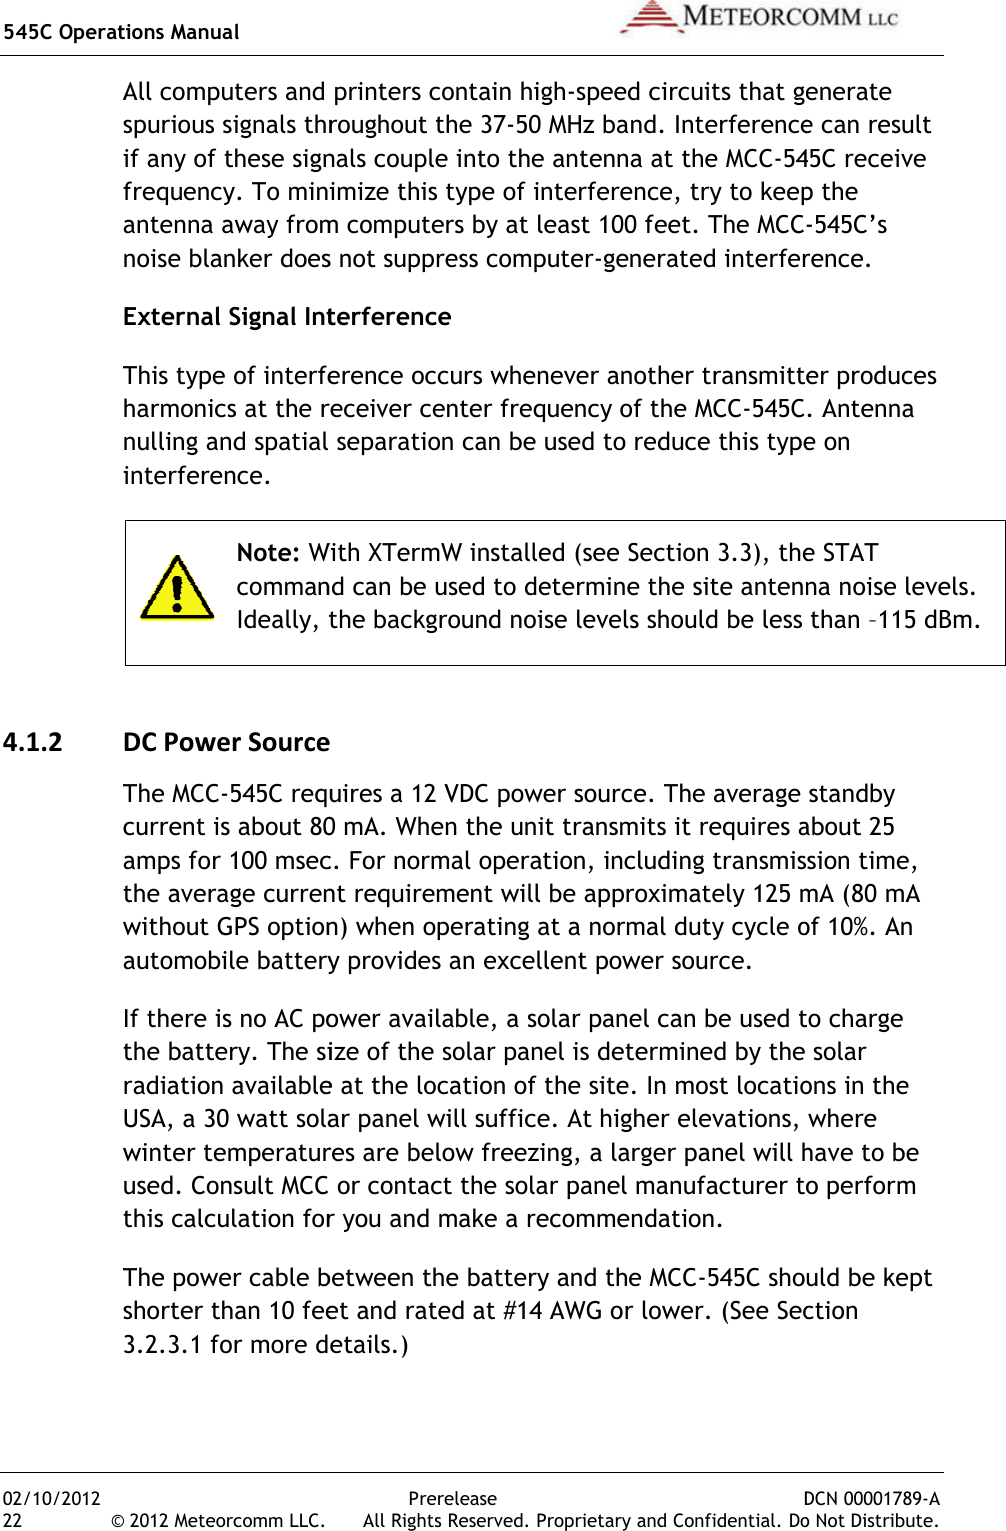 545C Operations Manual 02/10/2012 22 © 2012 Meteorcomm LLC. All computers and printers contain highspurious signals throughout the 37if any of these signals couple into the antenna at the MCCfrequency. To minimize this type of interference, try to keep the antenna away from computers by at least 100 noise blanker does not suppress computerExternal Signal InterferenceThis type of interference occurs whenever another transmitter produces harmonics at the receiver center frequency of the MCCnulling and spatial separation can be used to reduce this type on interference.  Note: With XTermW installed (see Section 3.3), the STAT command can be used to determine the site antenna noise levels. Ideally, the background noise levels should be less than4.1.2 DC Power SourceThe MCC-545C requires a 12 VDC power sourcecurrent is about 80 mAamps for 100 msecthe average current requwithout GPS option) when operating at a normal duty cycle of 10%automobile battery provides an excellent power source.If there is no AC power available, a solar panel can be used to charge the battery. The size of the solar panel is determined by the solar radiation available at the location of the siteUSA, a 30 watt solar panel will sufficewinter temperatures are below freezing, a larger panel will haused. Consult MCC or contact the solar panel manufacturer to perform this calculation for you and make a recommendation.The power cable between the battery and the MCCshorter than 10 feet and rated at #14 AWG or lower3.2.3.1 for more details.)Prerelease DCN .  All Rights Reserved. Proprietary and Confidential. DoAll computers and printers contain high-speed circuits that generatspurious signals throughout the 37-50 MHz band. Interference can result if any of these signals couple into the antenna at the MCC-545C receive To minimize this type of interference, try to keep the antenna away from computers by at least 100 feet. The MCC-noise blanker does not suppress computer-generated interference.External Signal Interference This type of interference occurs whenever another transmitter produces harmonics at the receiver center frequency of the MCC-545C. lling and spatial separation can be used to reduce this type on With XTermW installed (see Section 3.3), the STAT command can be used to determine the site antenna noise levels. Ideally, the background noise levels should be less thanDC Power Source 545C requires a 12 VDC power source. The average standby current is about 80 mA. When the unit transmits it requires about 25 amps for 100 msec. For normal operation, including transmission time, the average current requirement will be approximately 125 mA (80 mA without GPS option) when operating at a normal duty cycle of 10%automobile battery provides an excellent power source. If there is no AC power available, a solar panel can be used to charge size of the solar panel is determined by the solar radiation available at the location of the site. In most locations in the USA, a 30 watt solar panel will suffice. At higher elevations, where winter temperatures are below freezing, a larger panel will haConsult MCC or contact the solar panel manufacturer to perform this calculation for you and make a recommendation. The power cable between the battery and the MCC-545C should be kept shorter than 10 feet and rated at #14 AWG or lower. (See Section 3.2.3.1 for more details.)  DCN 00001789-A Do Not Distribute. speed circuits that generate Interference can result 545C receive To minimize this type of interference, try to keep the -545C’s generated interference. This type of interference occurs whenever another transmitter produces . Antenna lling and spatial separation can be used to reduce this type on With XTermW installed (see Section 3.3), the STAT command can be used to determine the site antenna noise levels. Ideally, the background noise levels should be less than –115 dBm. The average standby When the unit transmits it requires about 25 For normal operation, including transmission time, irement will be approximately 125 mA (80 mA without GPS option) when operating at a normal duty cycle of 10%. An If there is no AC power available, a solar panel can be used to charge size of the solar panel is determined by the solar In most locations in the At higher elevations, where winter temperatures are below freezing, a larger panel will have to be Consult MCC or contact the solar panel manufacturer to perform 545C should be kept ection 